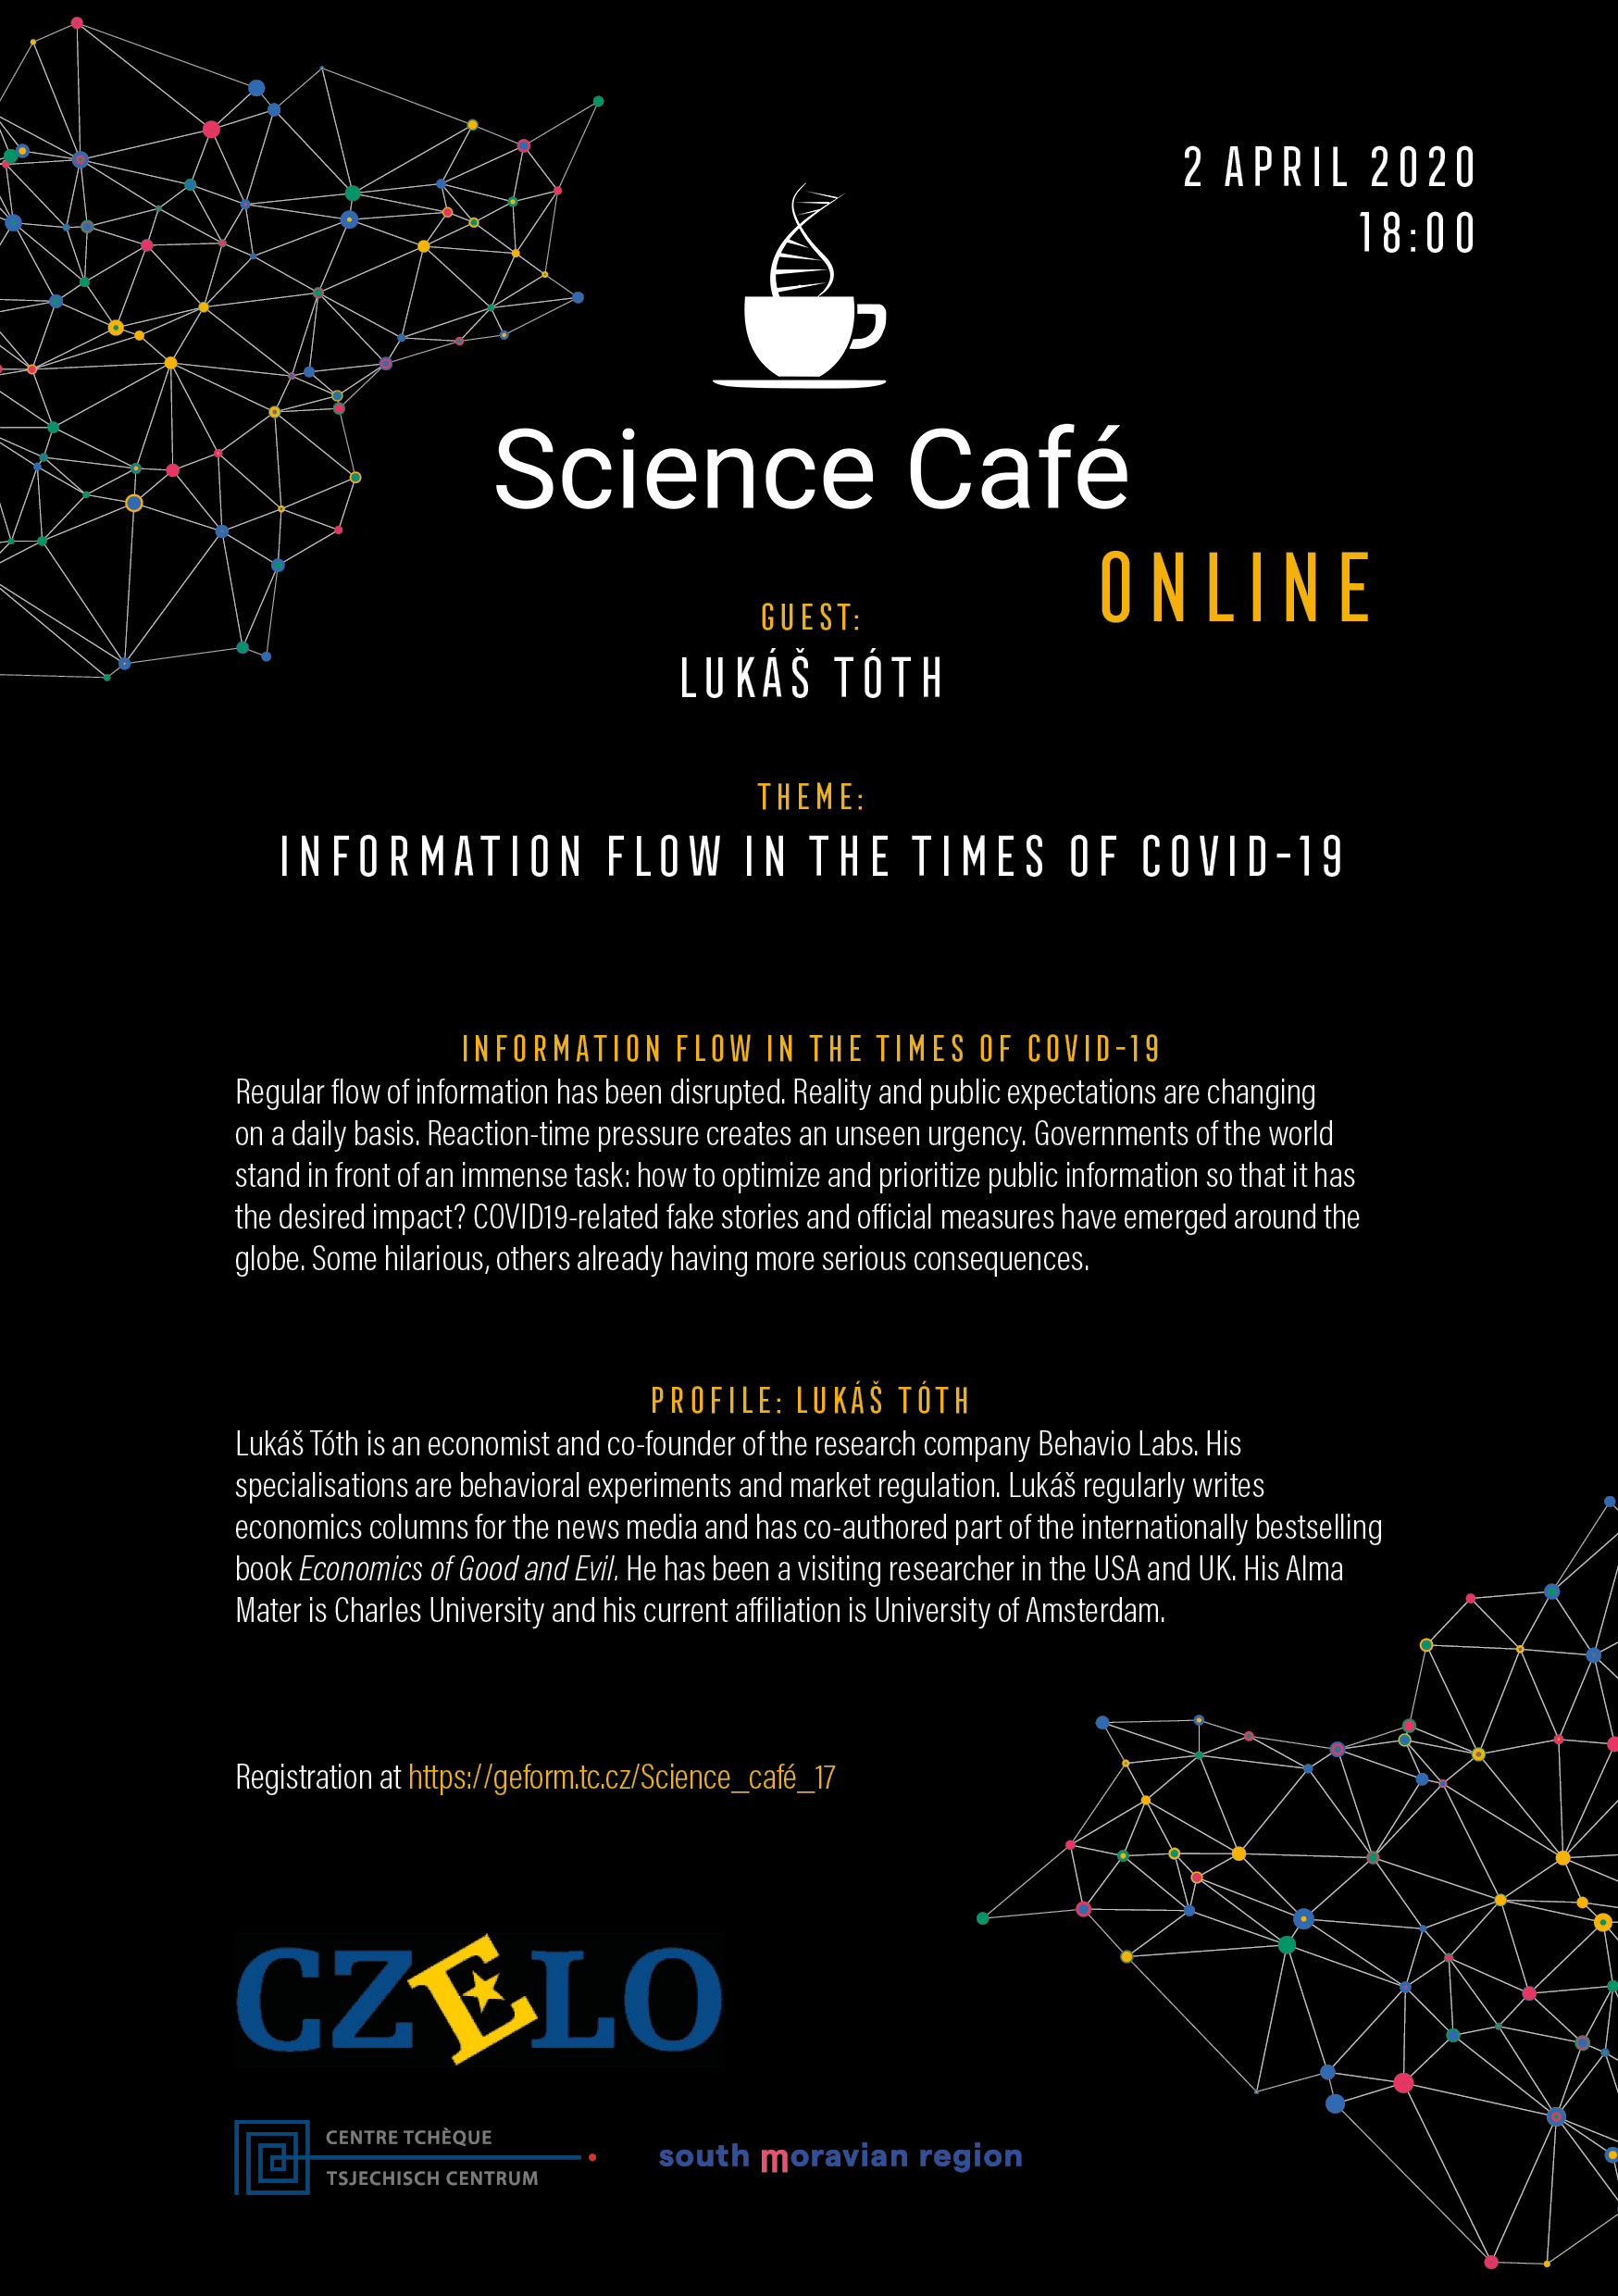 South Moravian Region (Czech Republic) and its partners are pleased to invite you to the Science Café with Lukáš Tóth, an unconventional open discussion, this time exceptionally held online, focused on the topic of information flow in times of COVID-19. Regular flow of information has been disrupted. Reality and public expectations are changing on a daily basis. Reaction-time pressure creates an unseen urgency. 